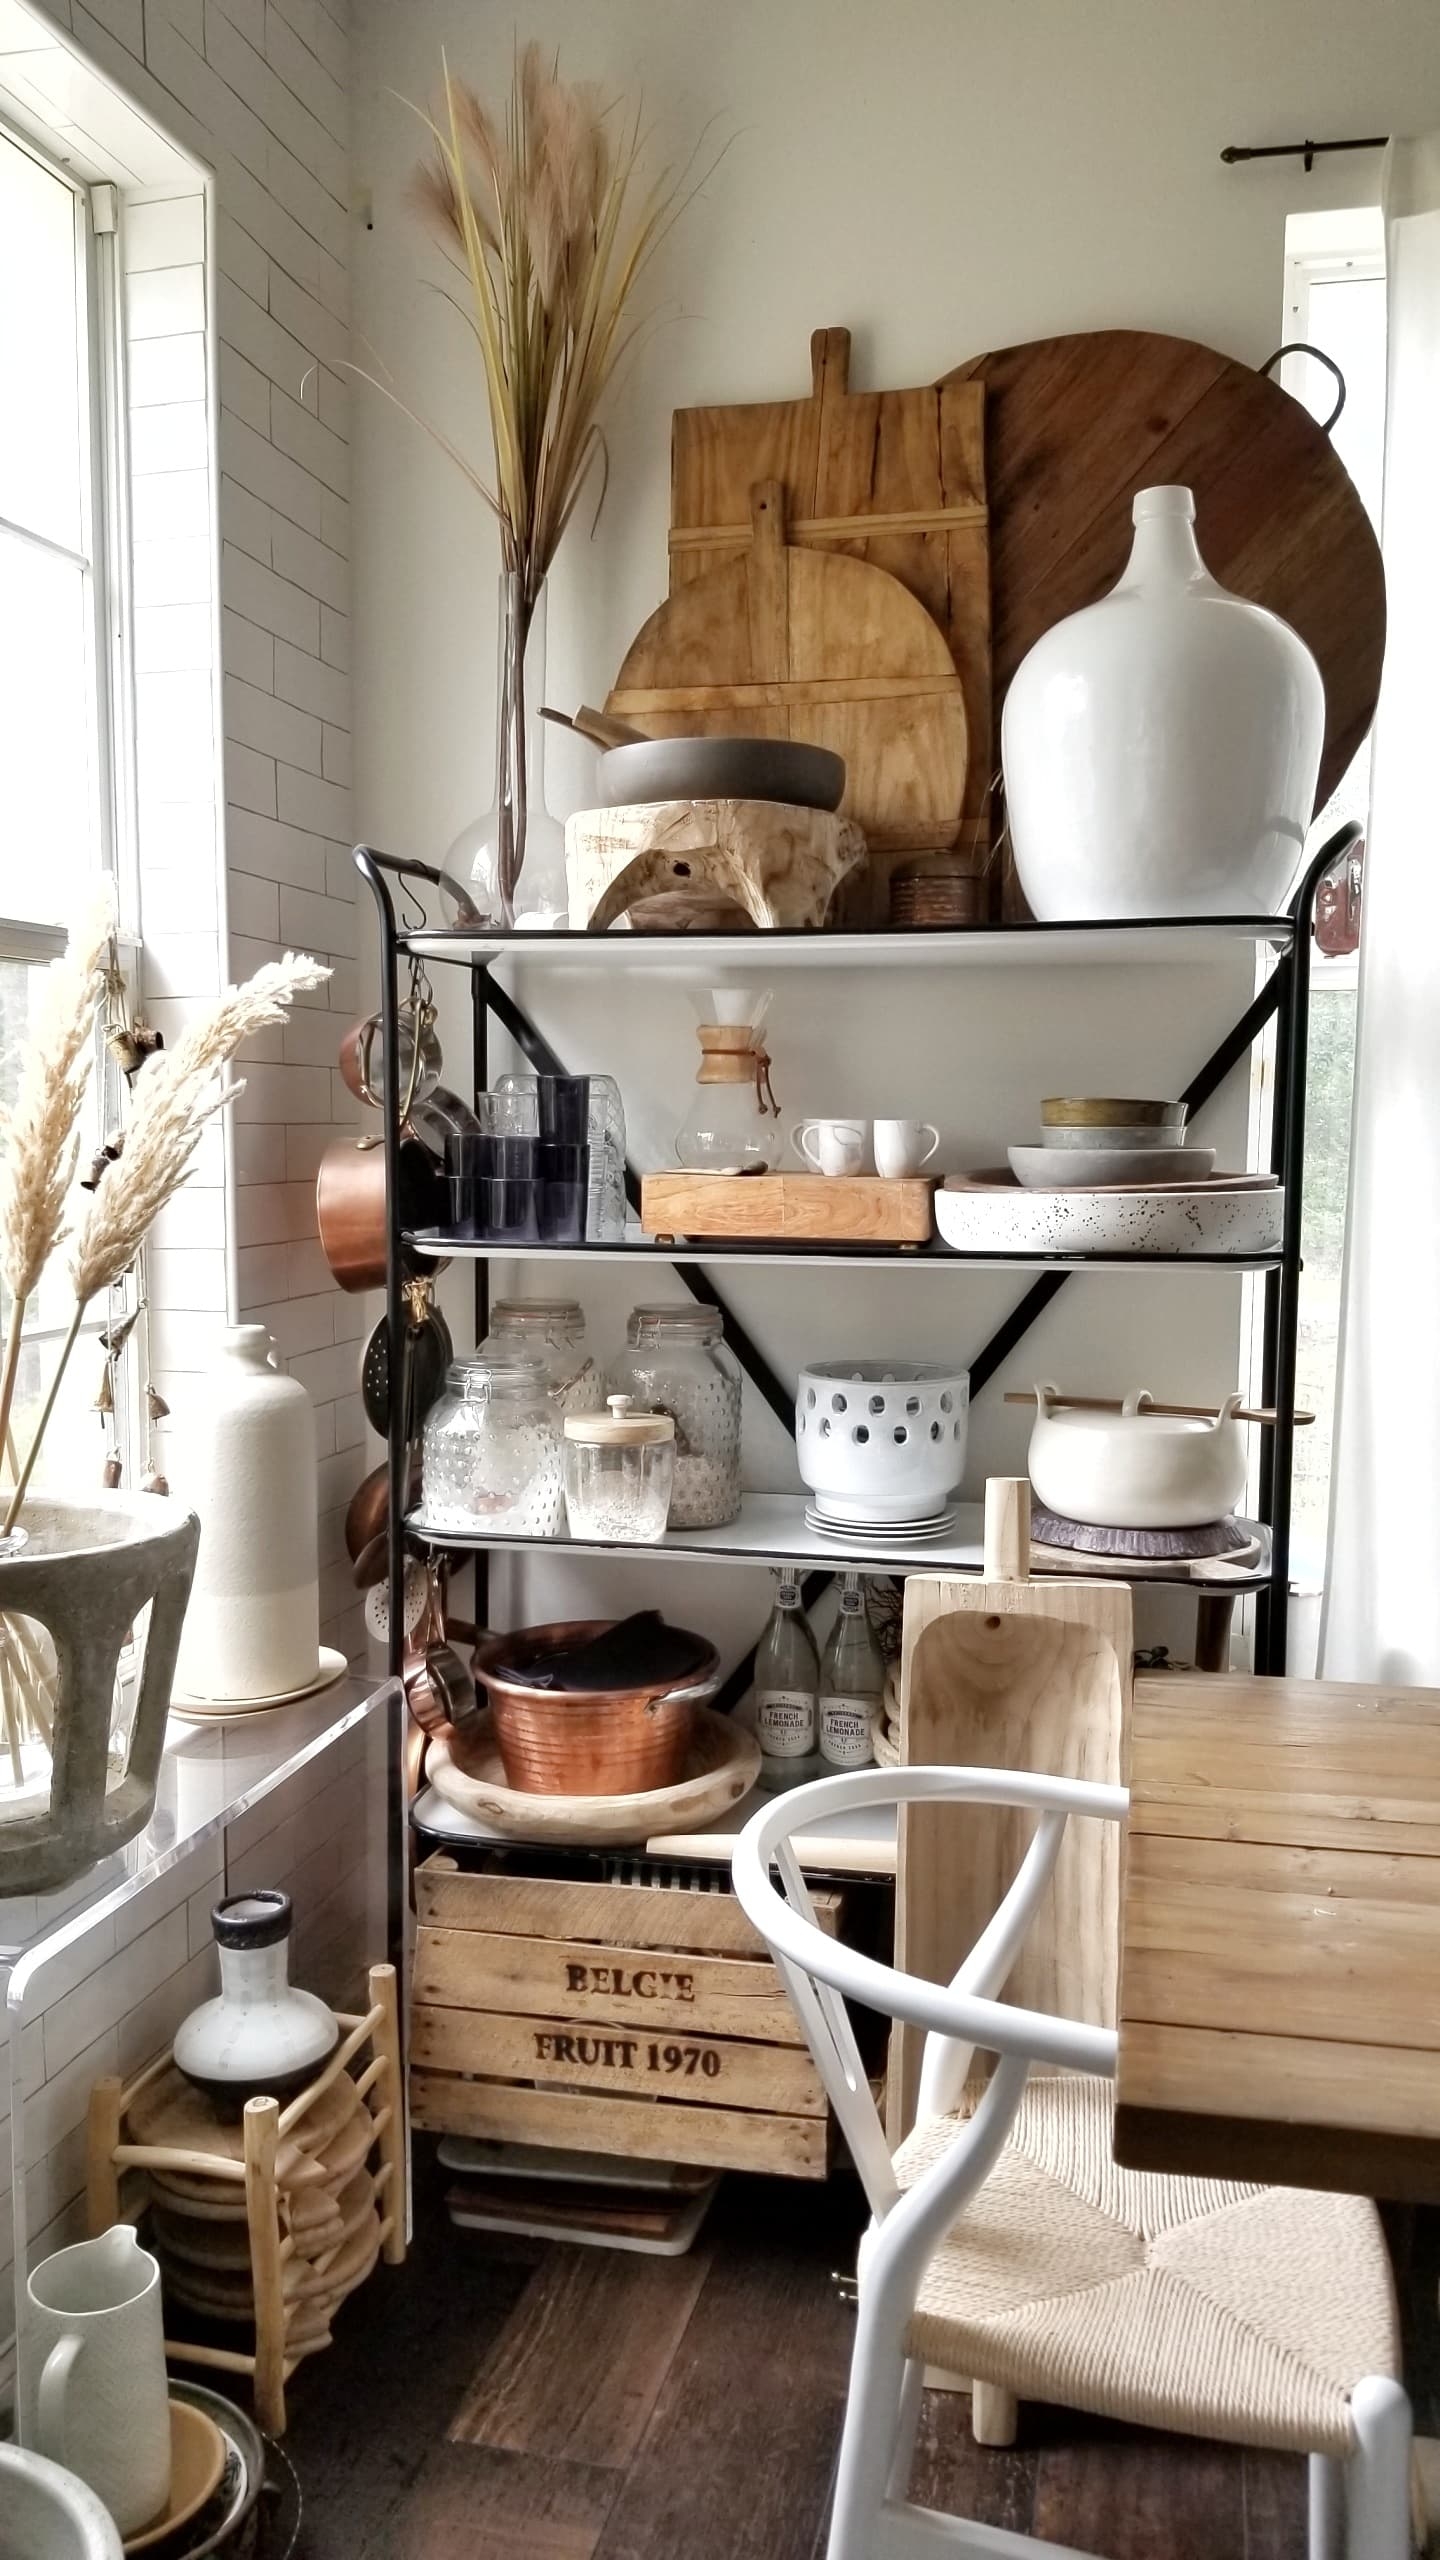 white kitchen organization storage tips and tricks makeover accessories cabinets fixerupper modern farmhouse industrial chic extra space storage diy open shelving kitchen island shelves coffee station